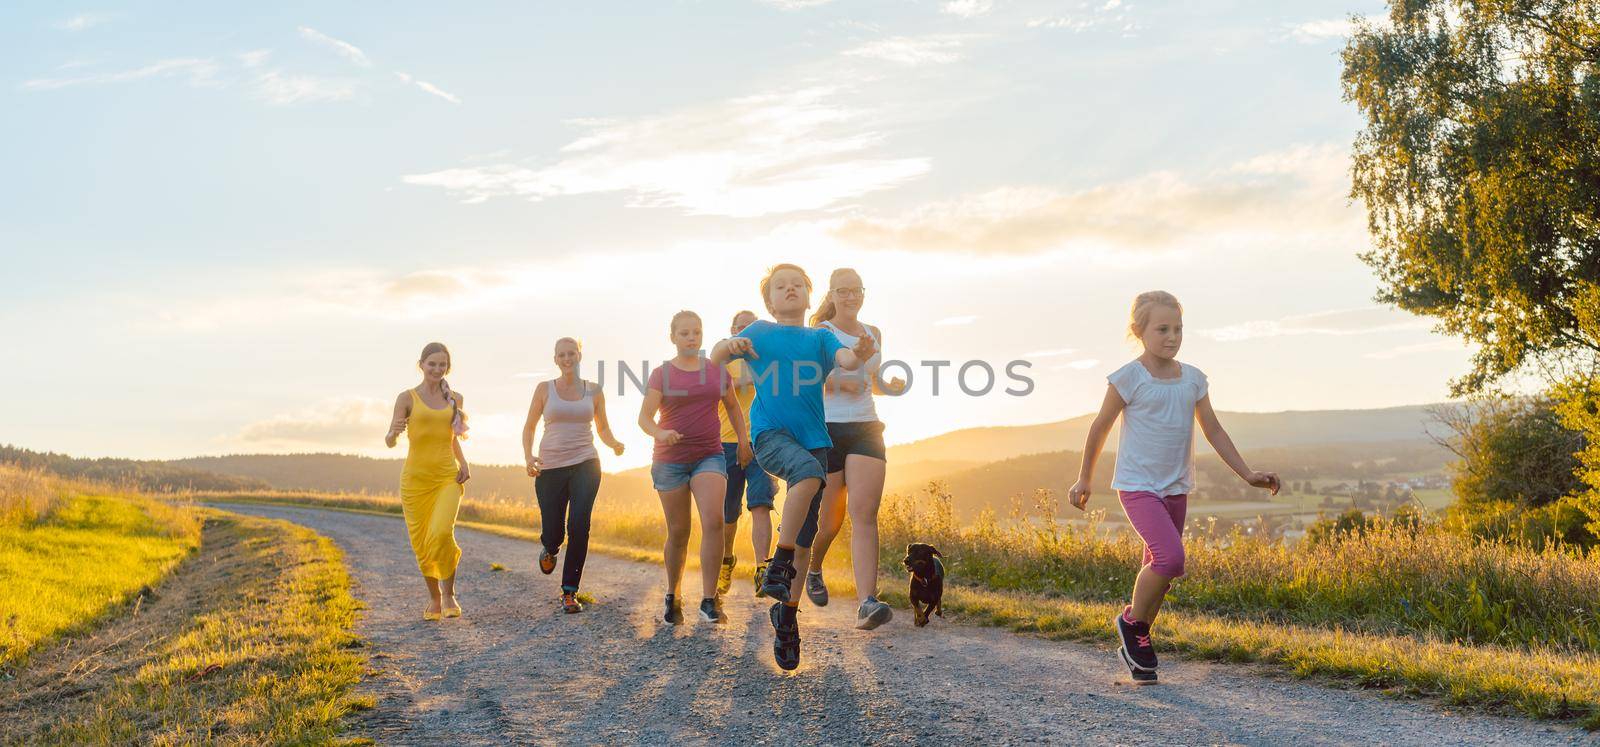 Playful family running and playing on a path in summer landscape by Kzenon